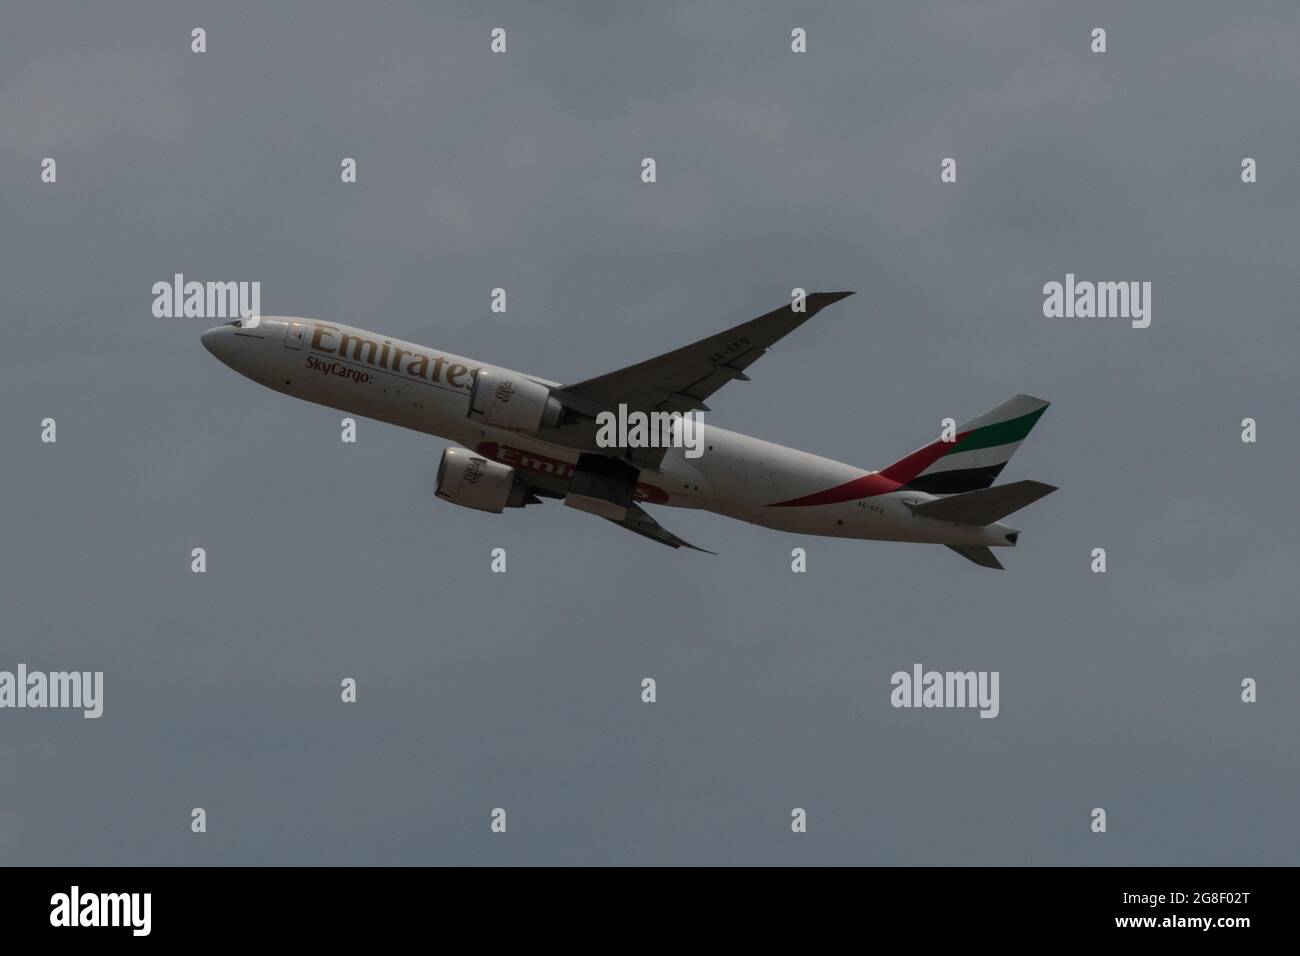 Hong Kong, China, 17 Jul 2021, A Boeing 777F cargo plane of Emirates Airlines takes off from Hong Kong International Airport. Stock Photo